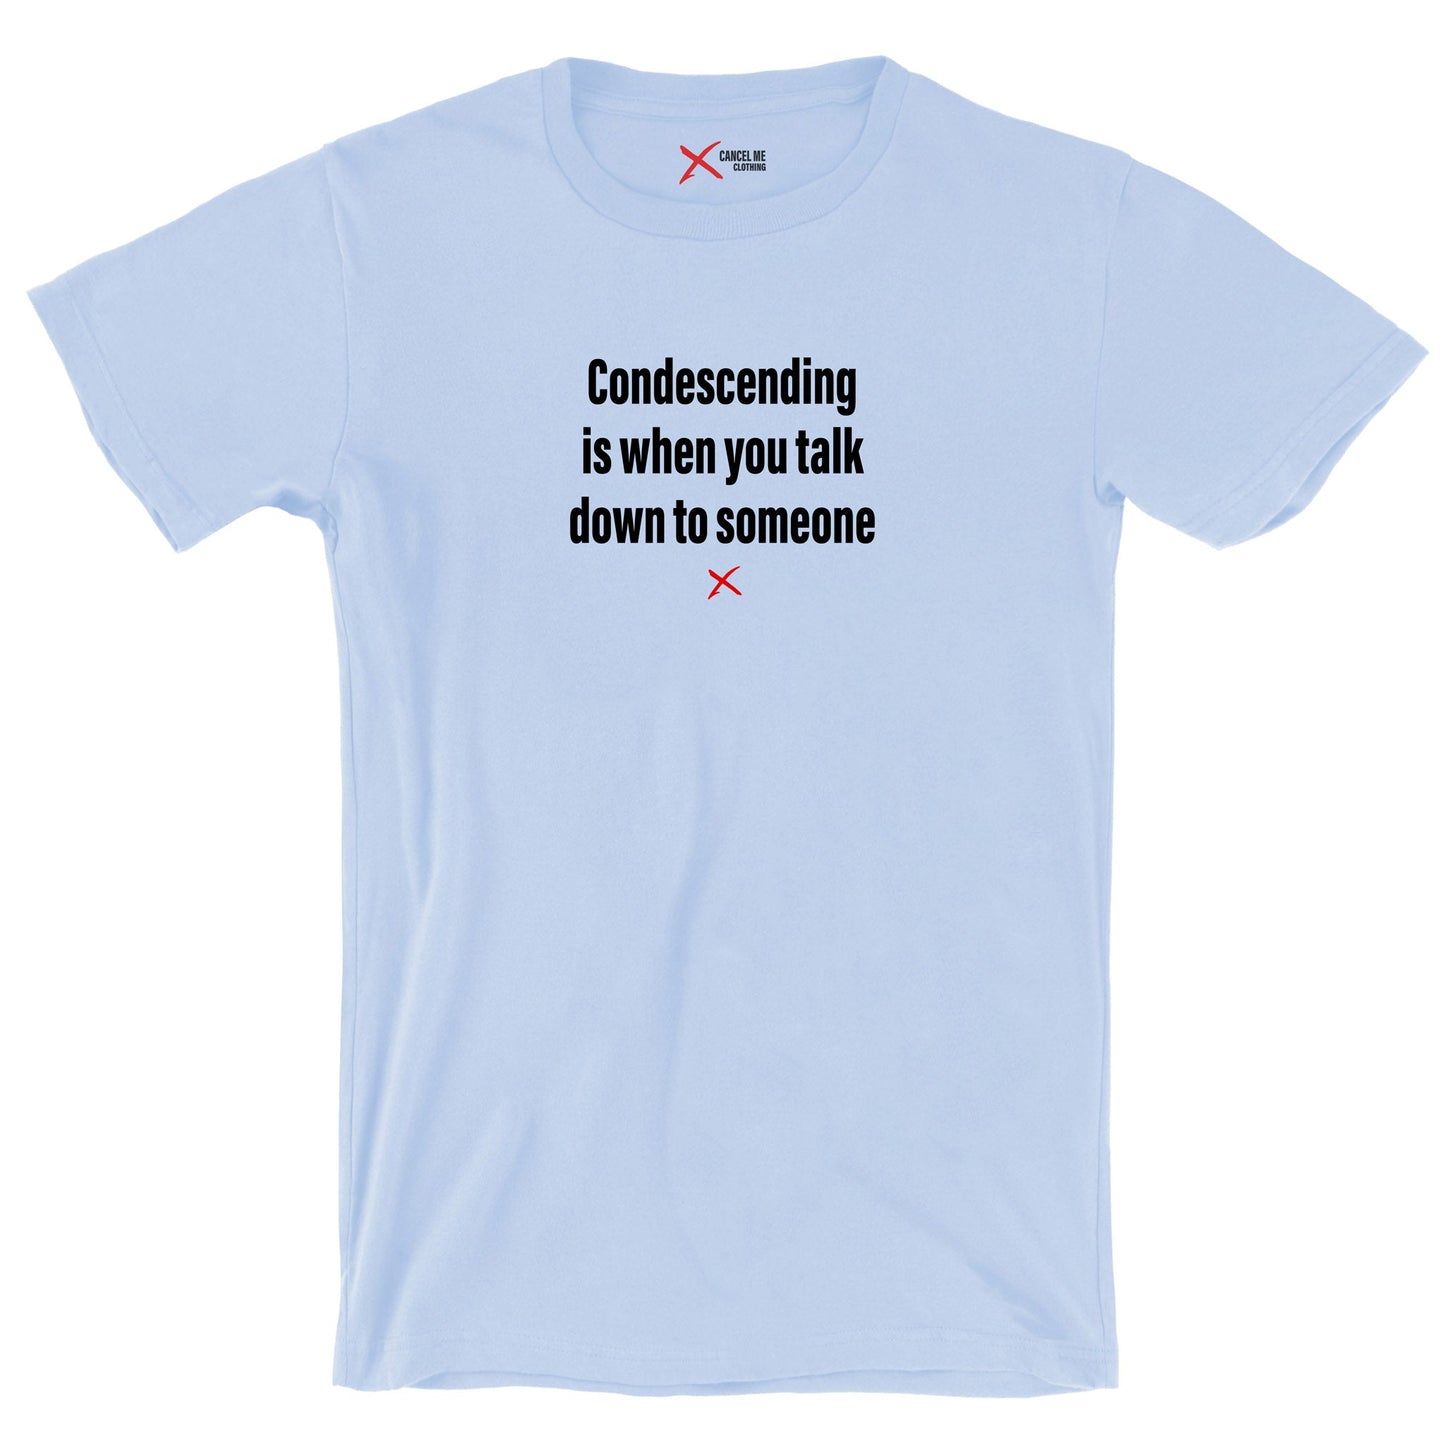 Condescending is when you talk down to someone - Shirt